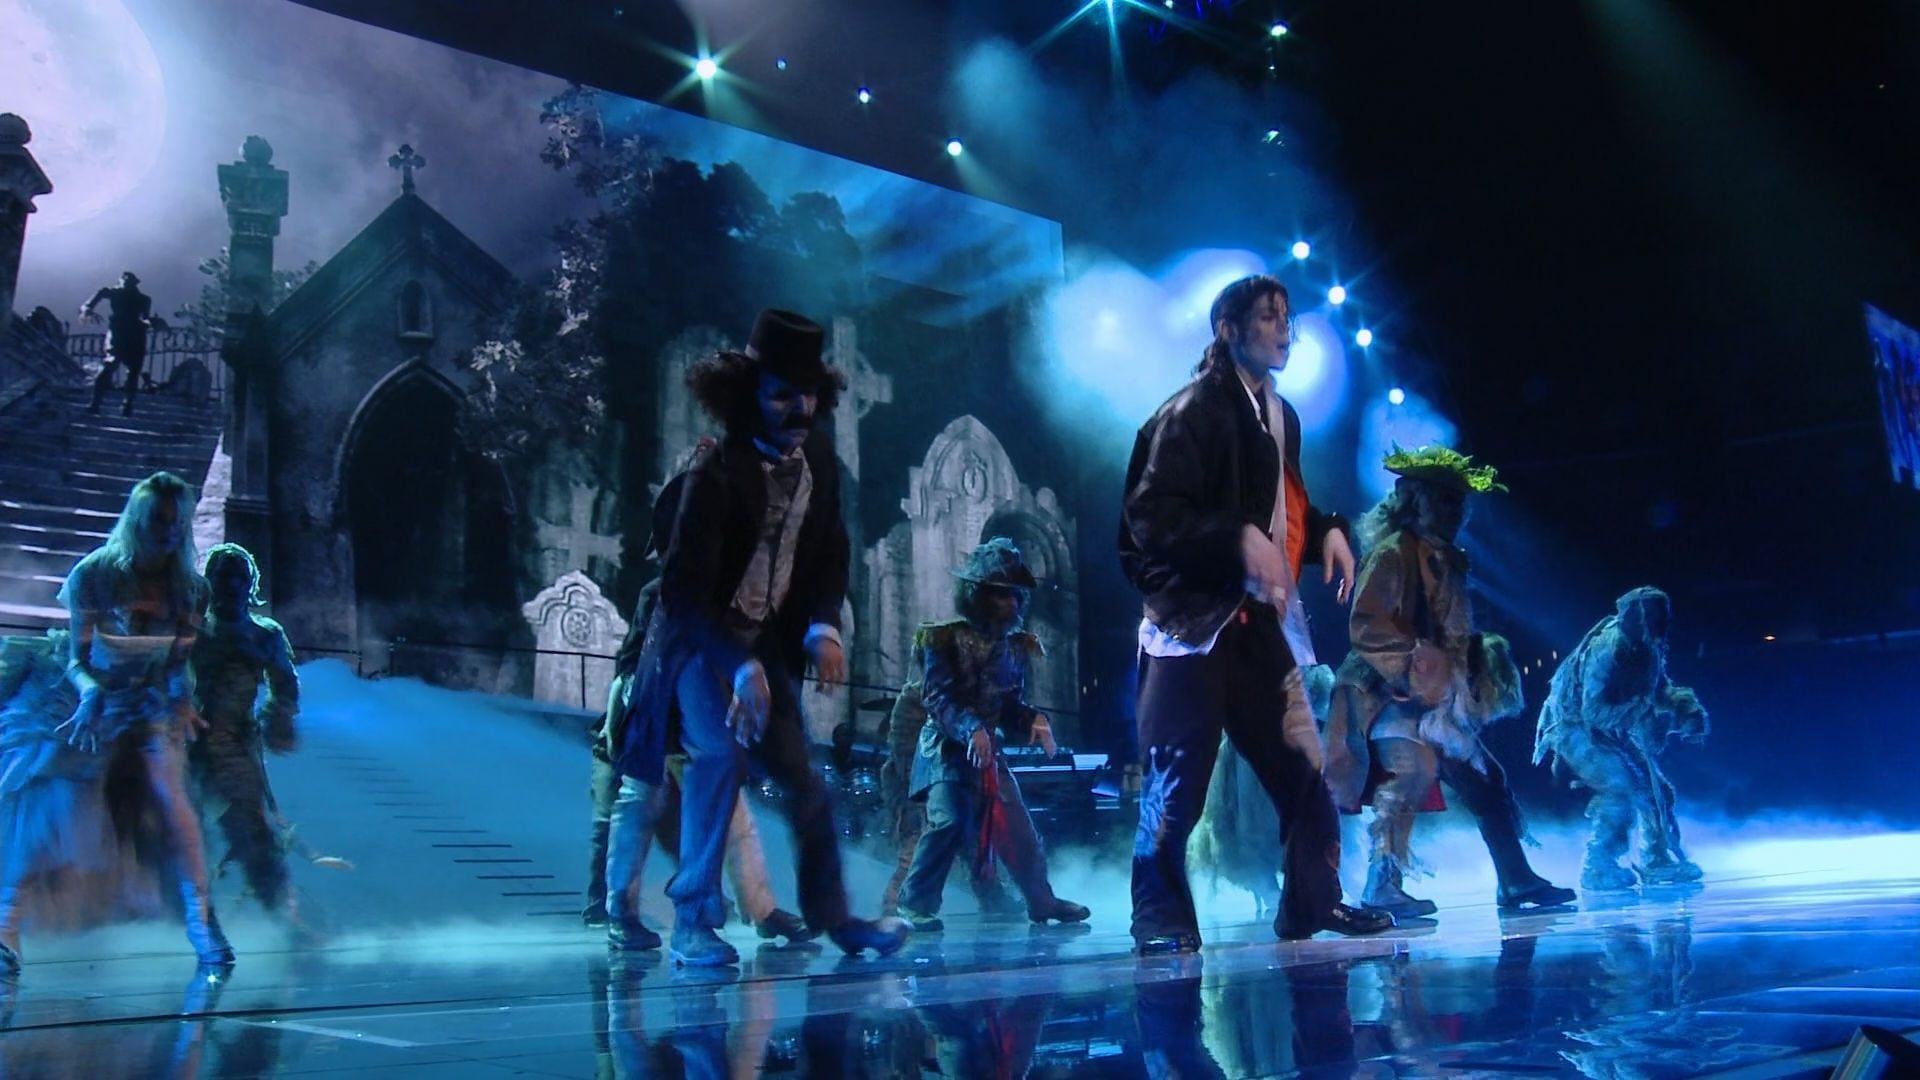 Michael Jackson's 'This Is It': Auditions - Searching for the World's Best Dancers Backdrop